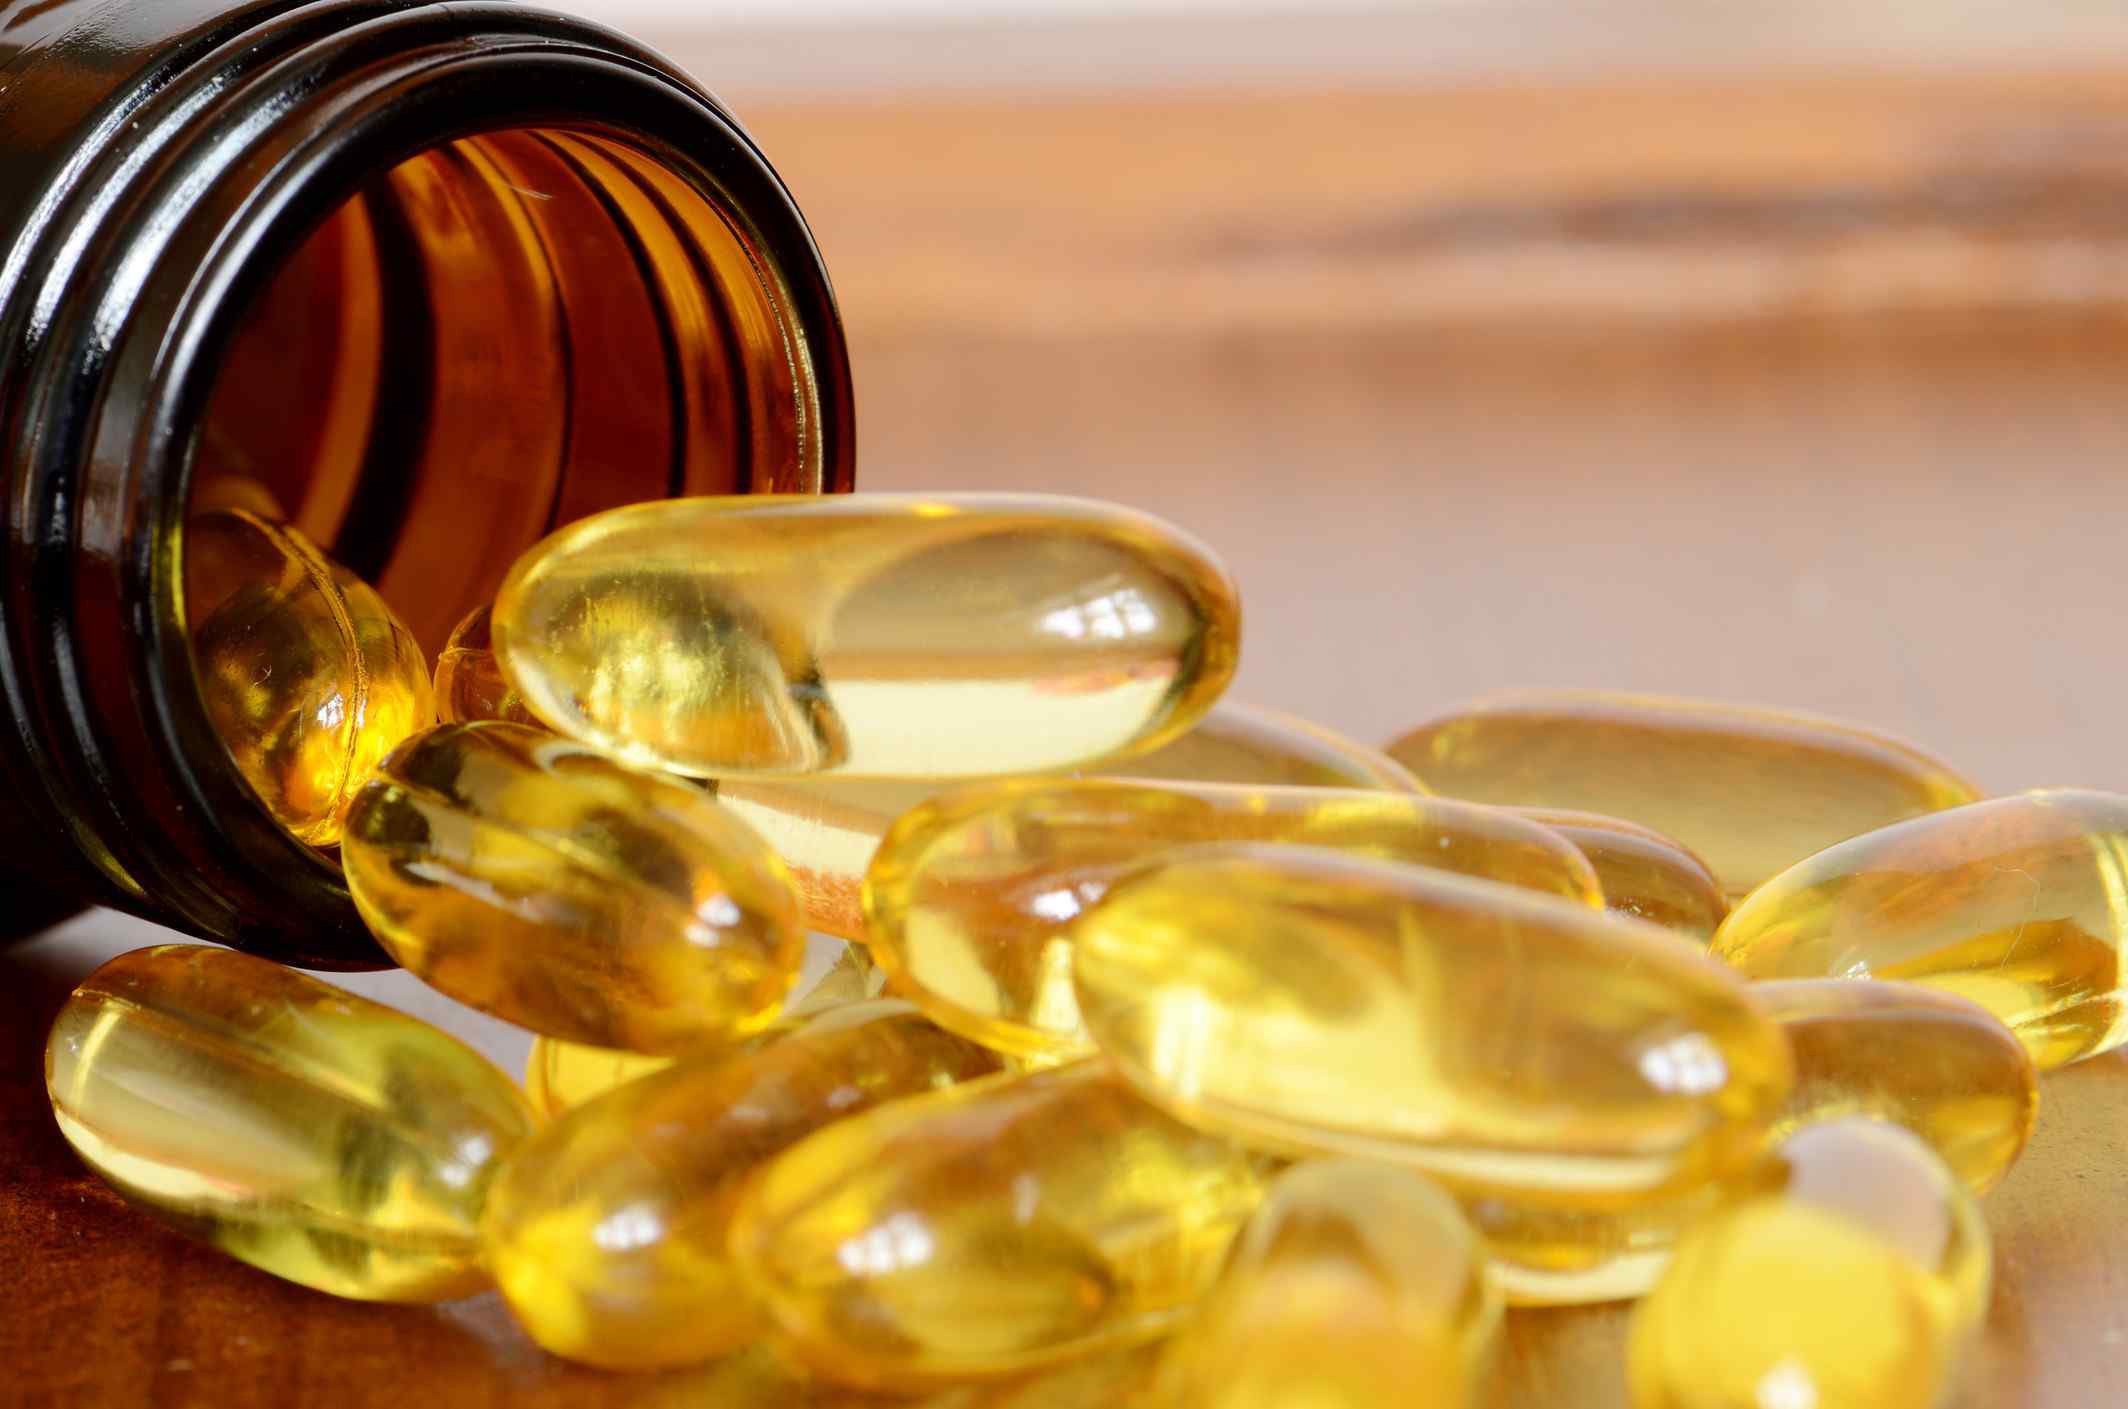 The oil is loaded with omega-3 fatty acids, which are super good for you.